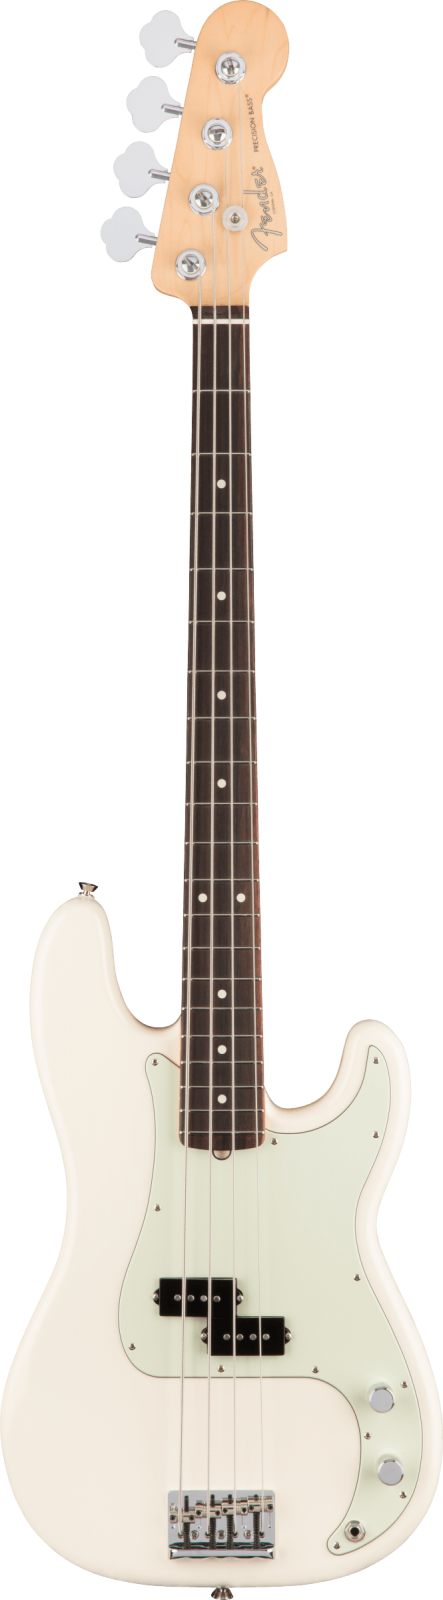 Fender American Pro Precision Bass - Rosewood Fingerboard, Olympic White